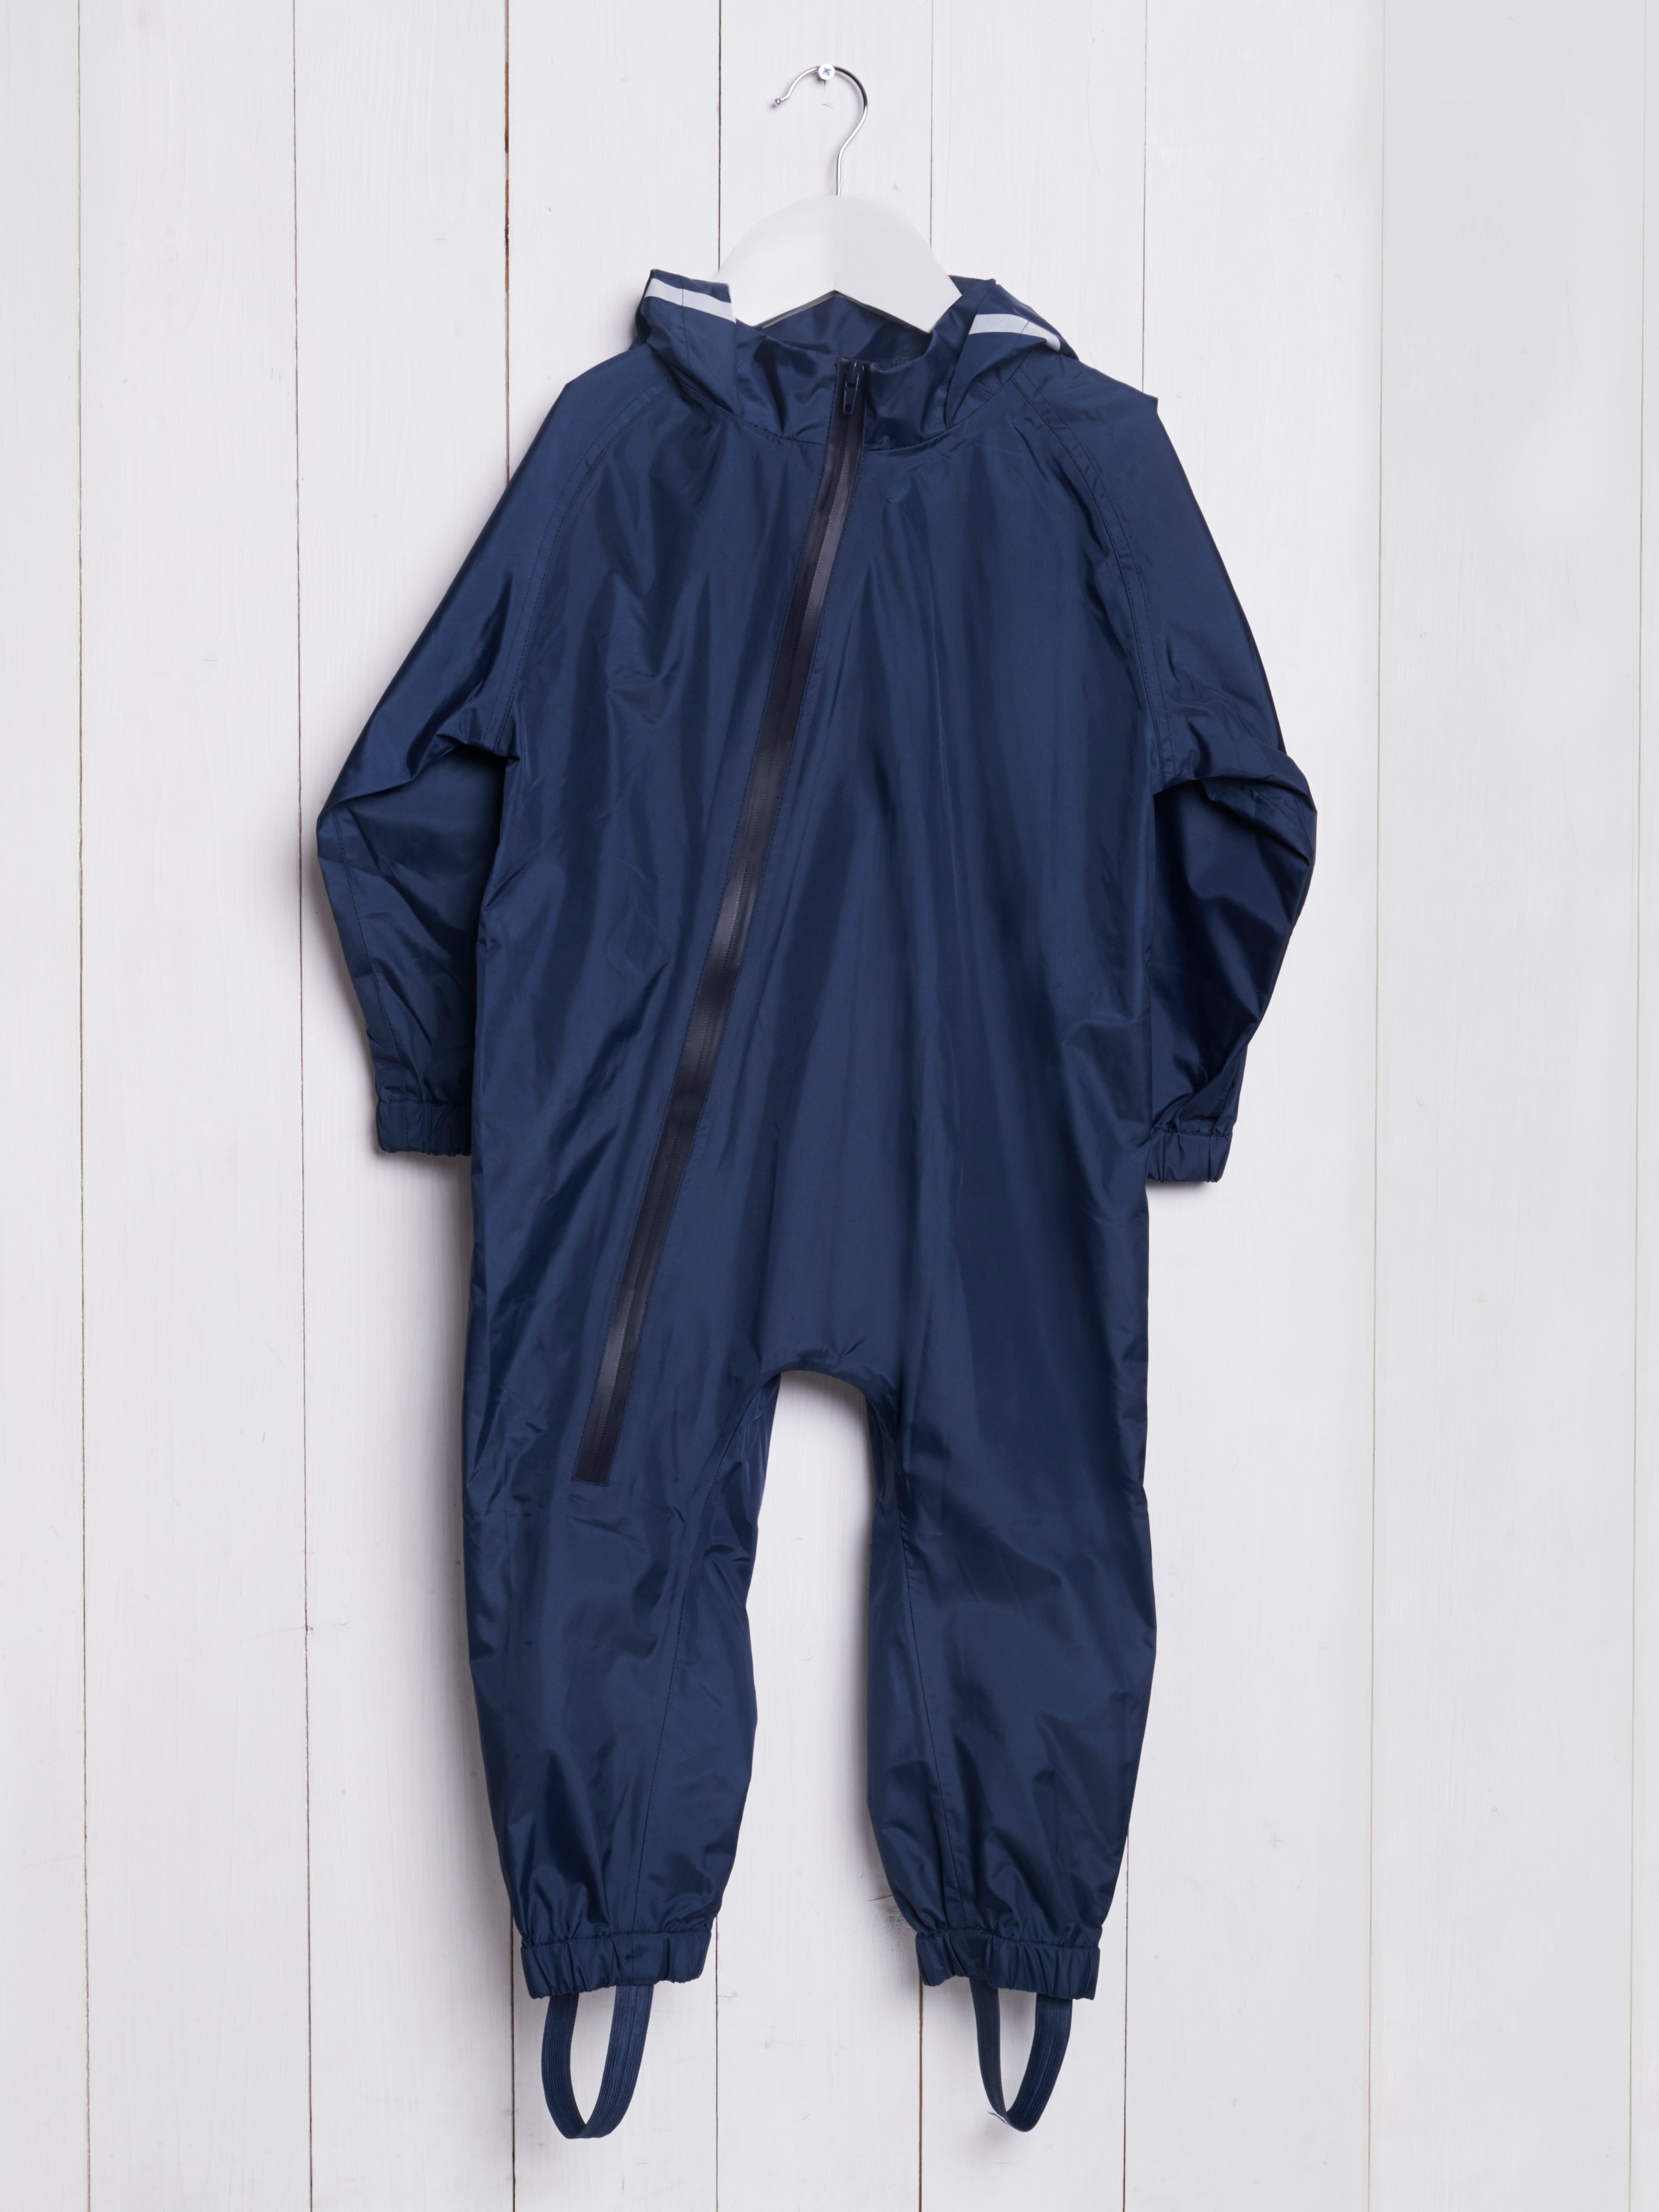 Bestselling Grass & Air Toddler Puddlesuit in Navy at Our Kid